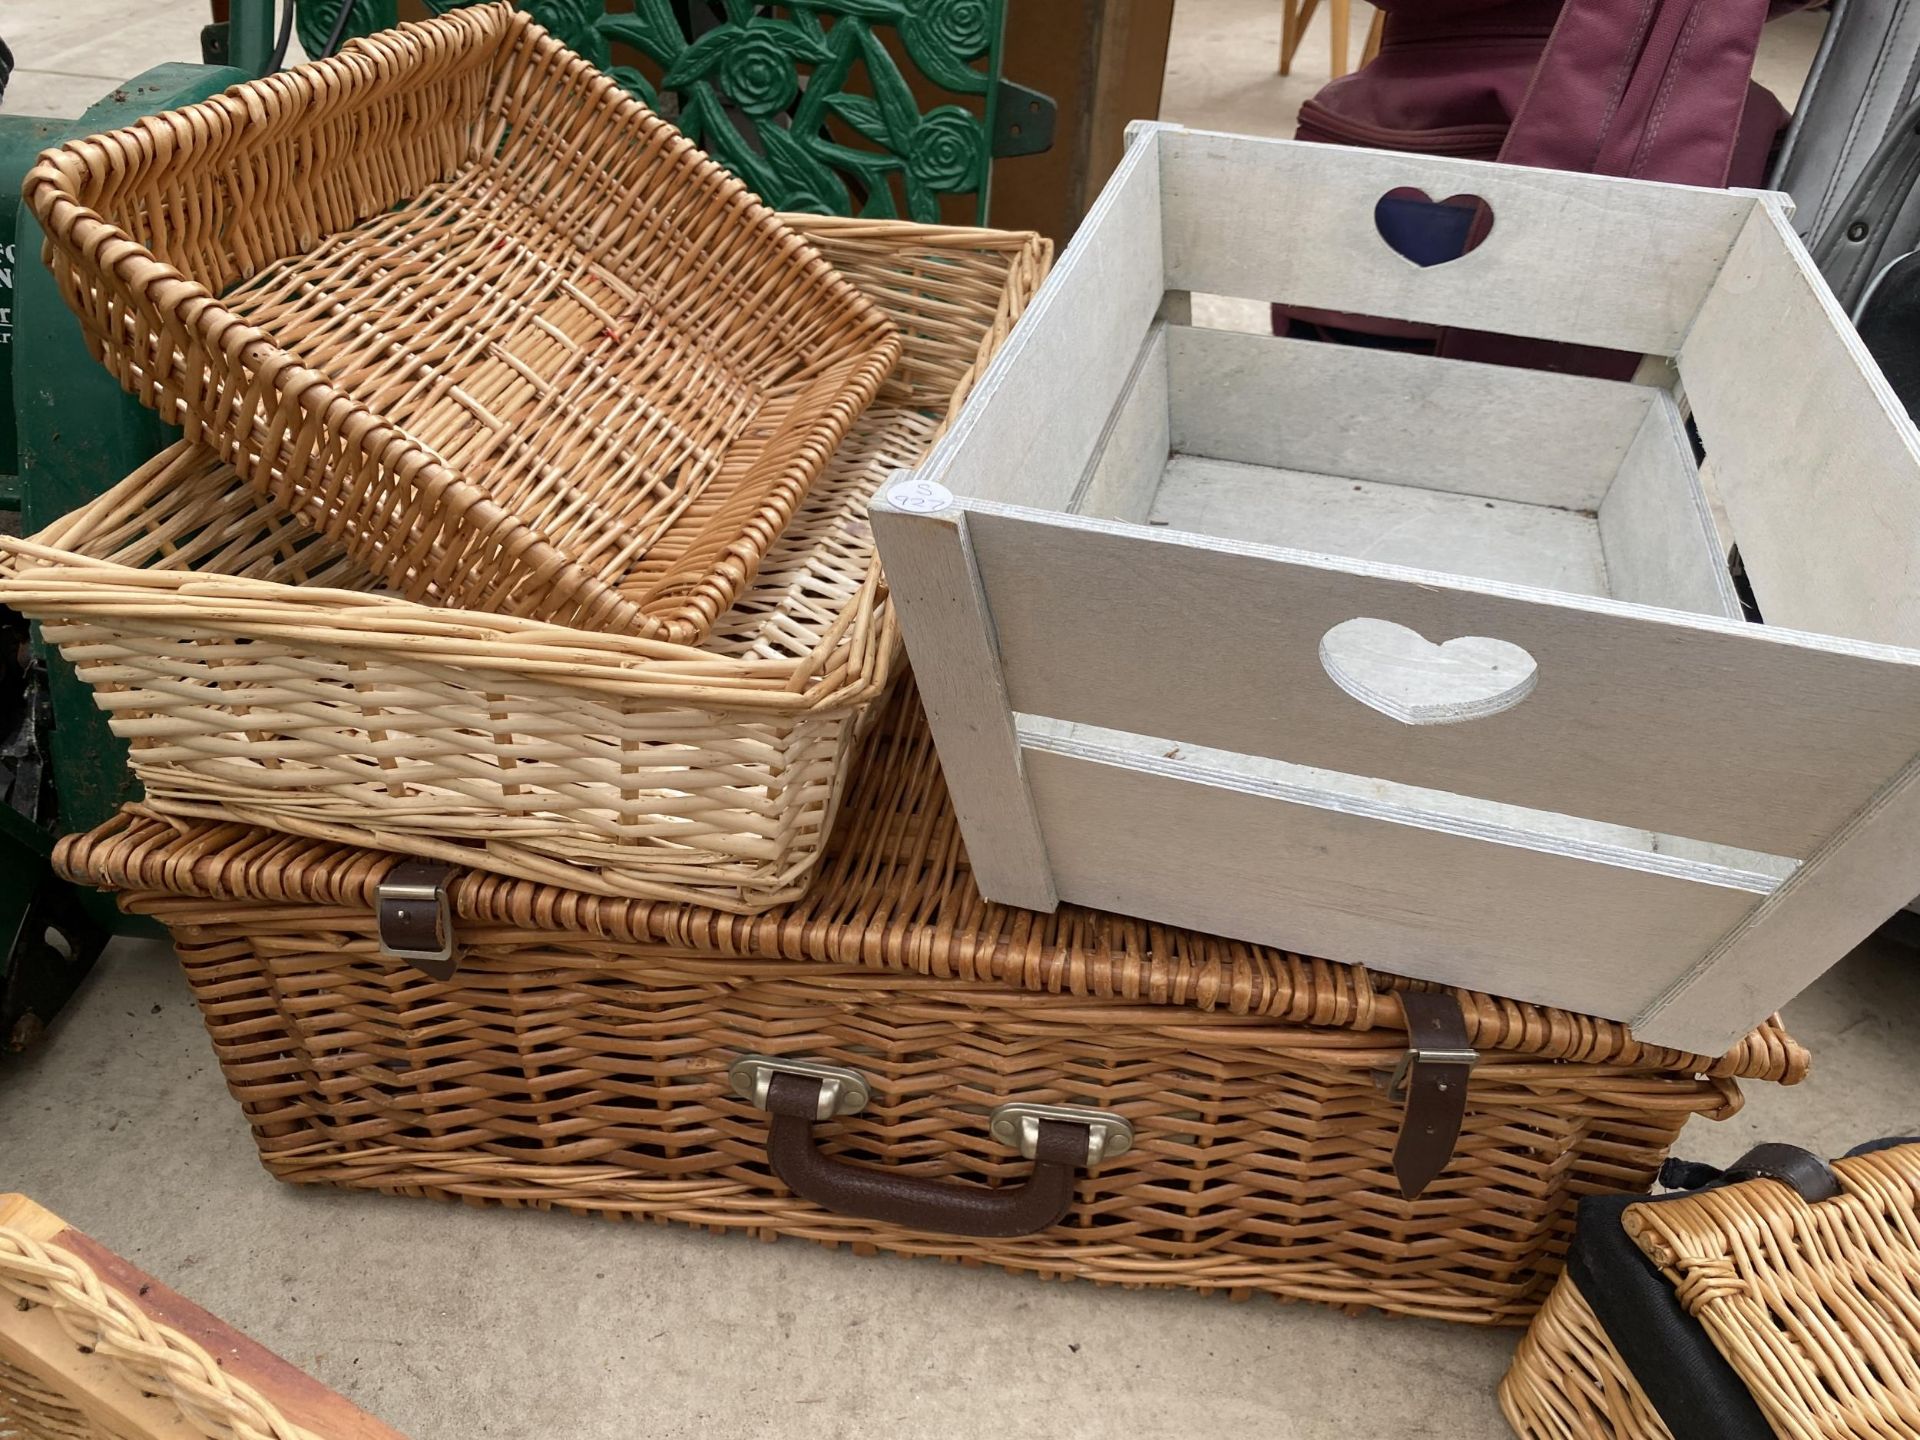 AN ASSORTMENT OF WICKER BASKETS AND A DECORATIVE WOODEN STORAGE TRAY - Image 2 of 2